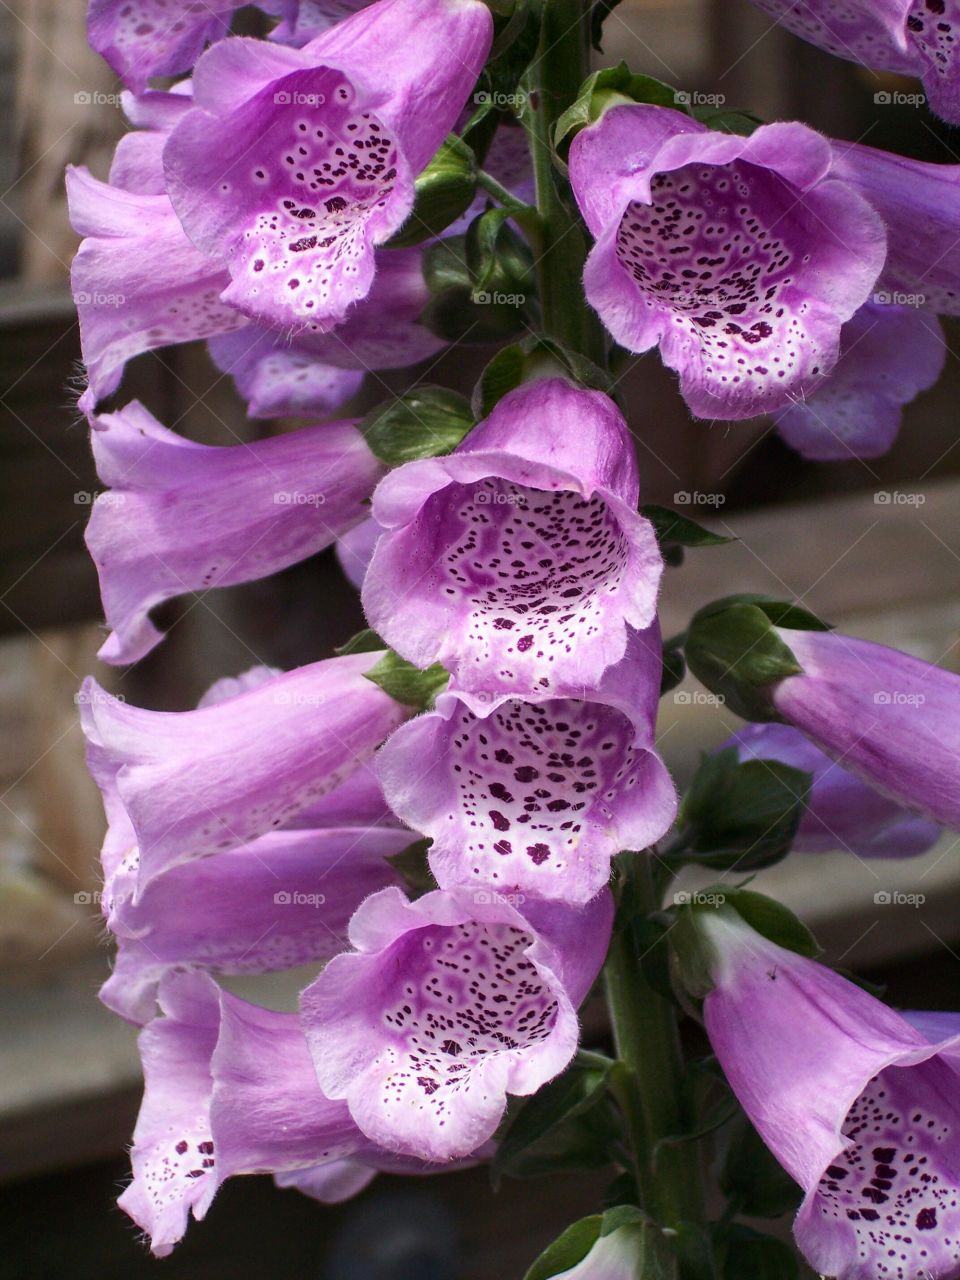 Closeup of foxglove flower blooming at outdoors